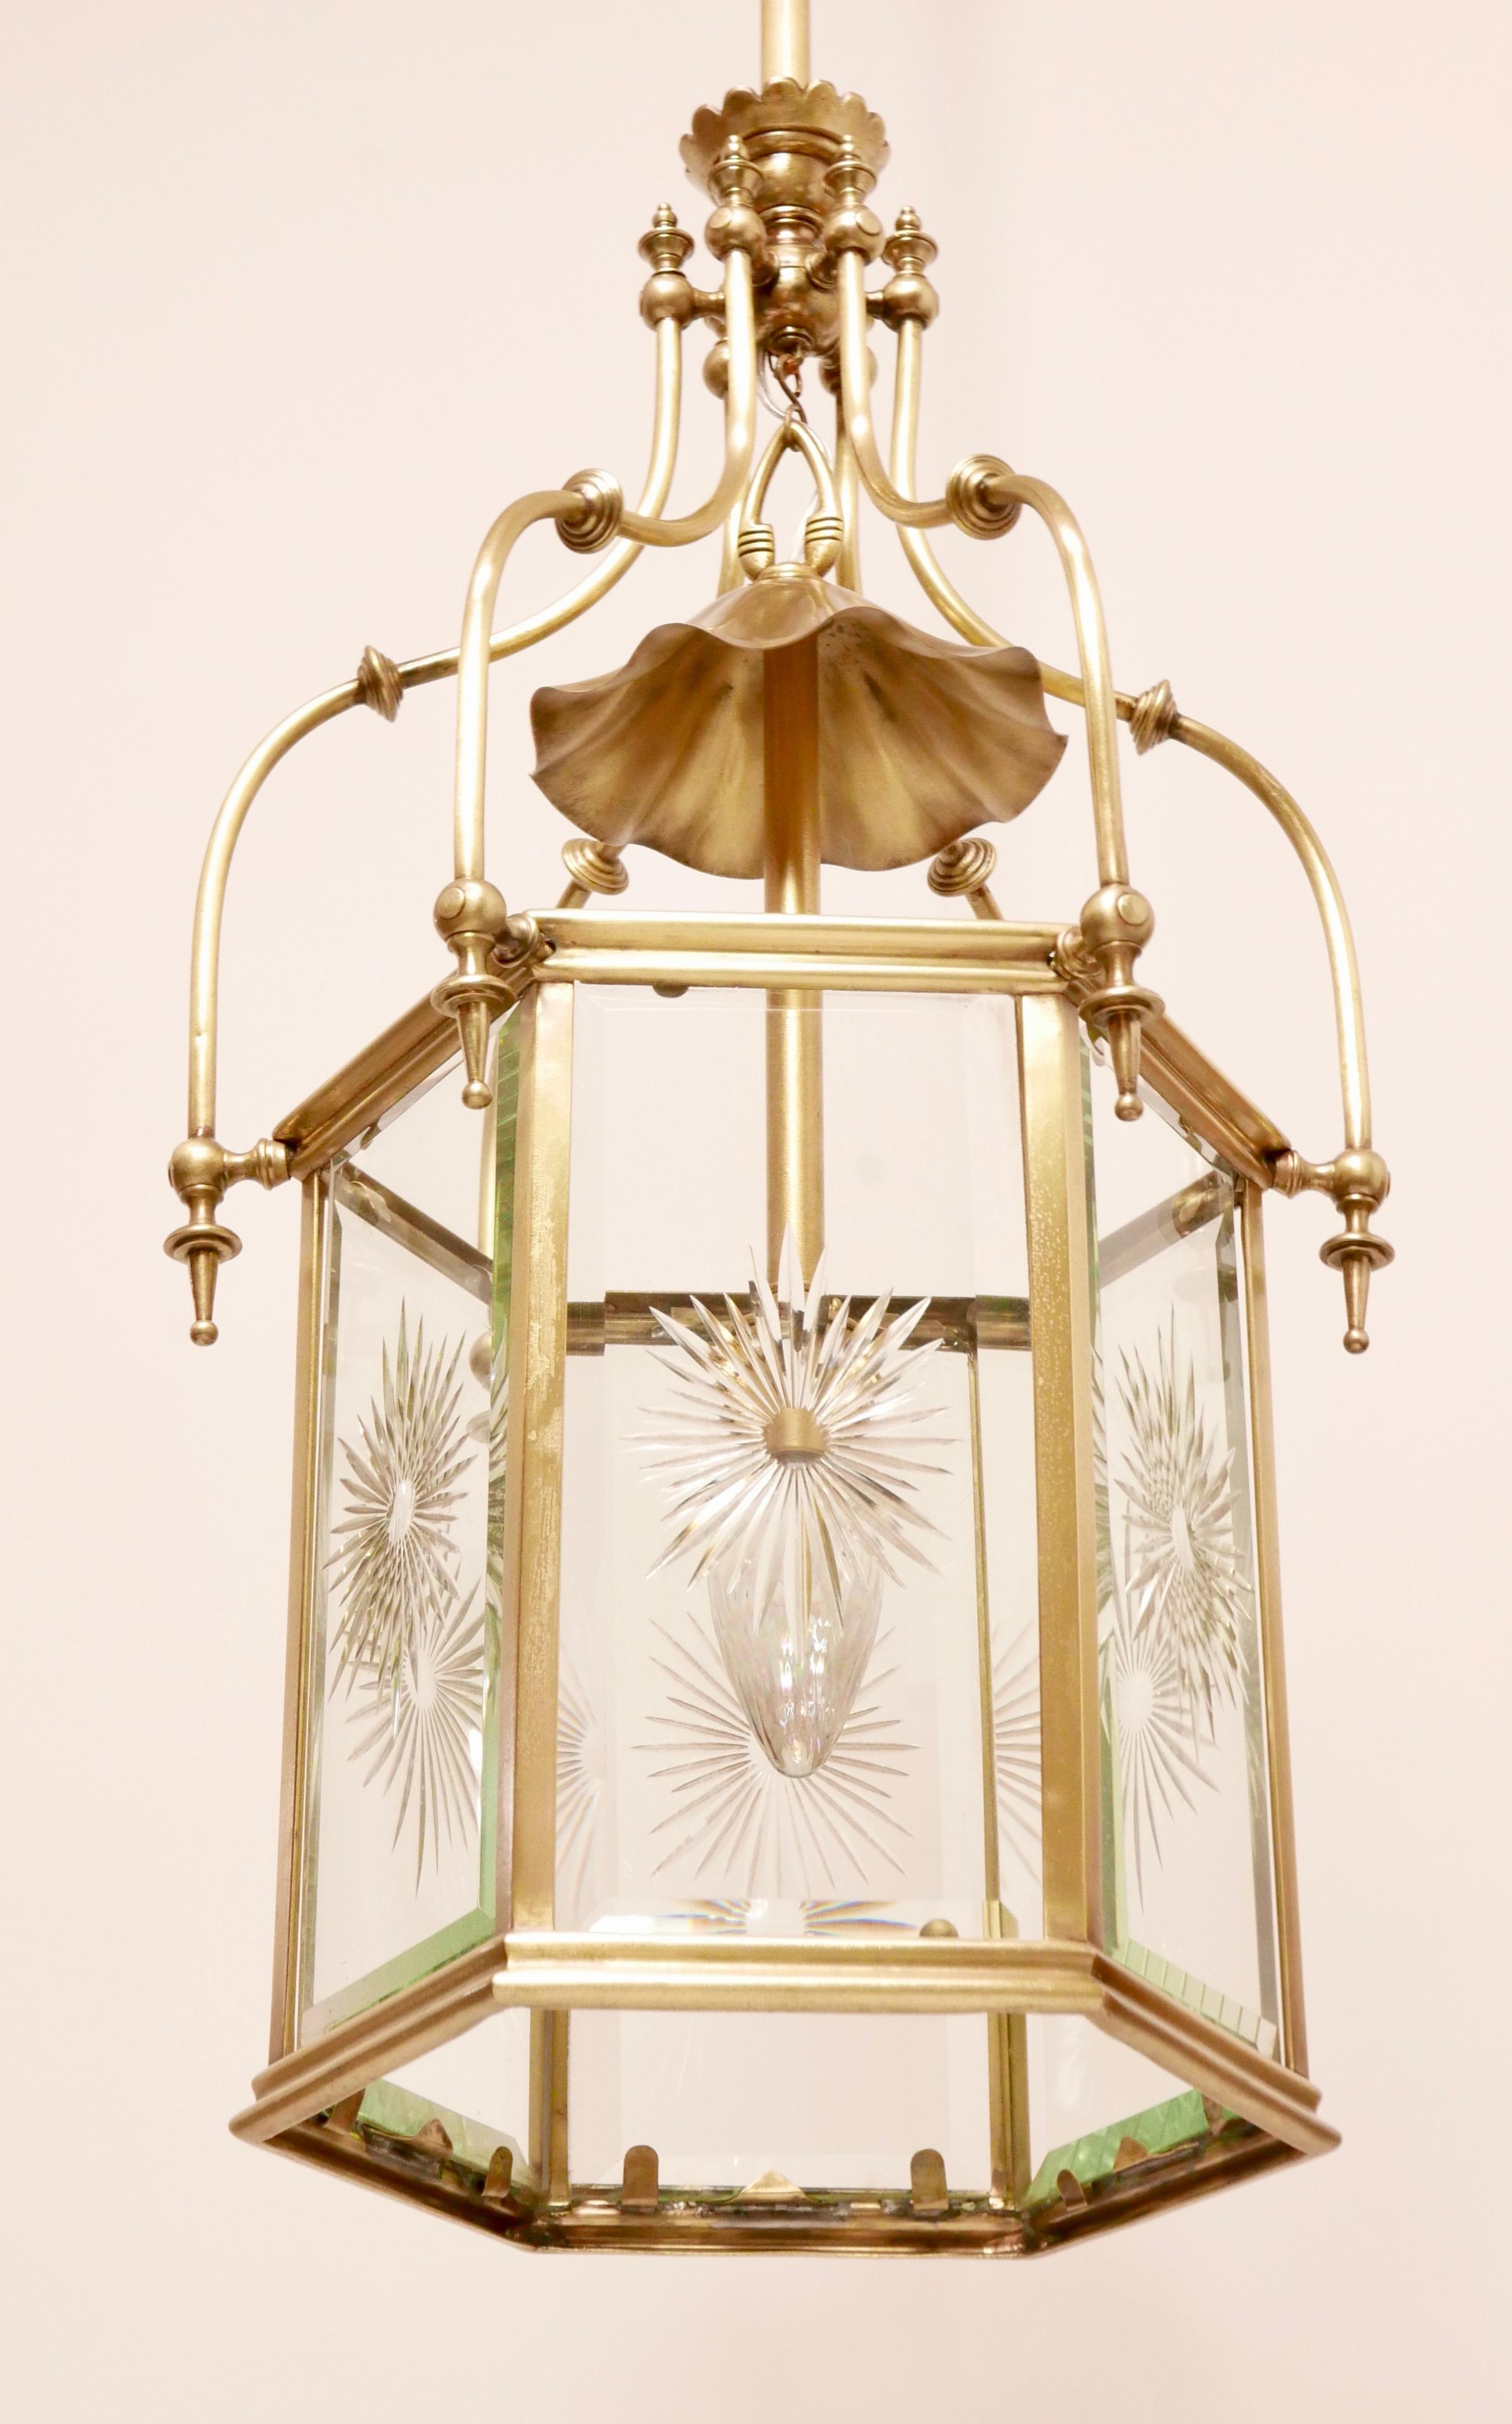 Exceptional 19th Century Brass & Cut Glass Hexagon Shaped Entry or Hall Lantern For Sale 2